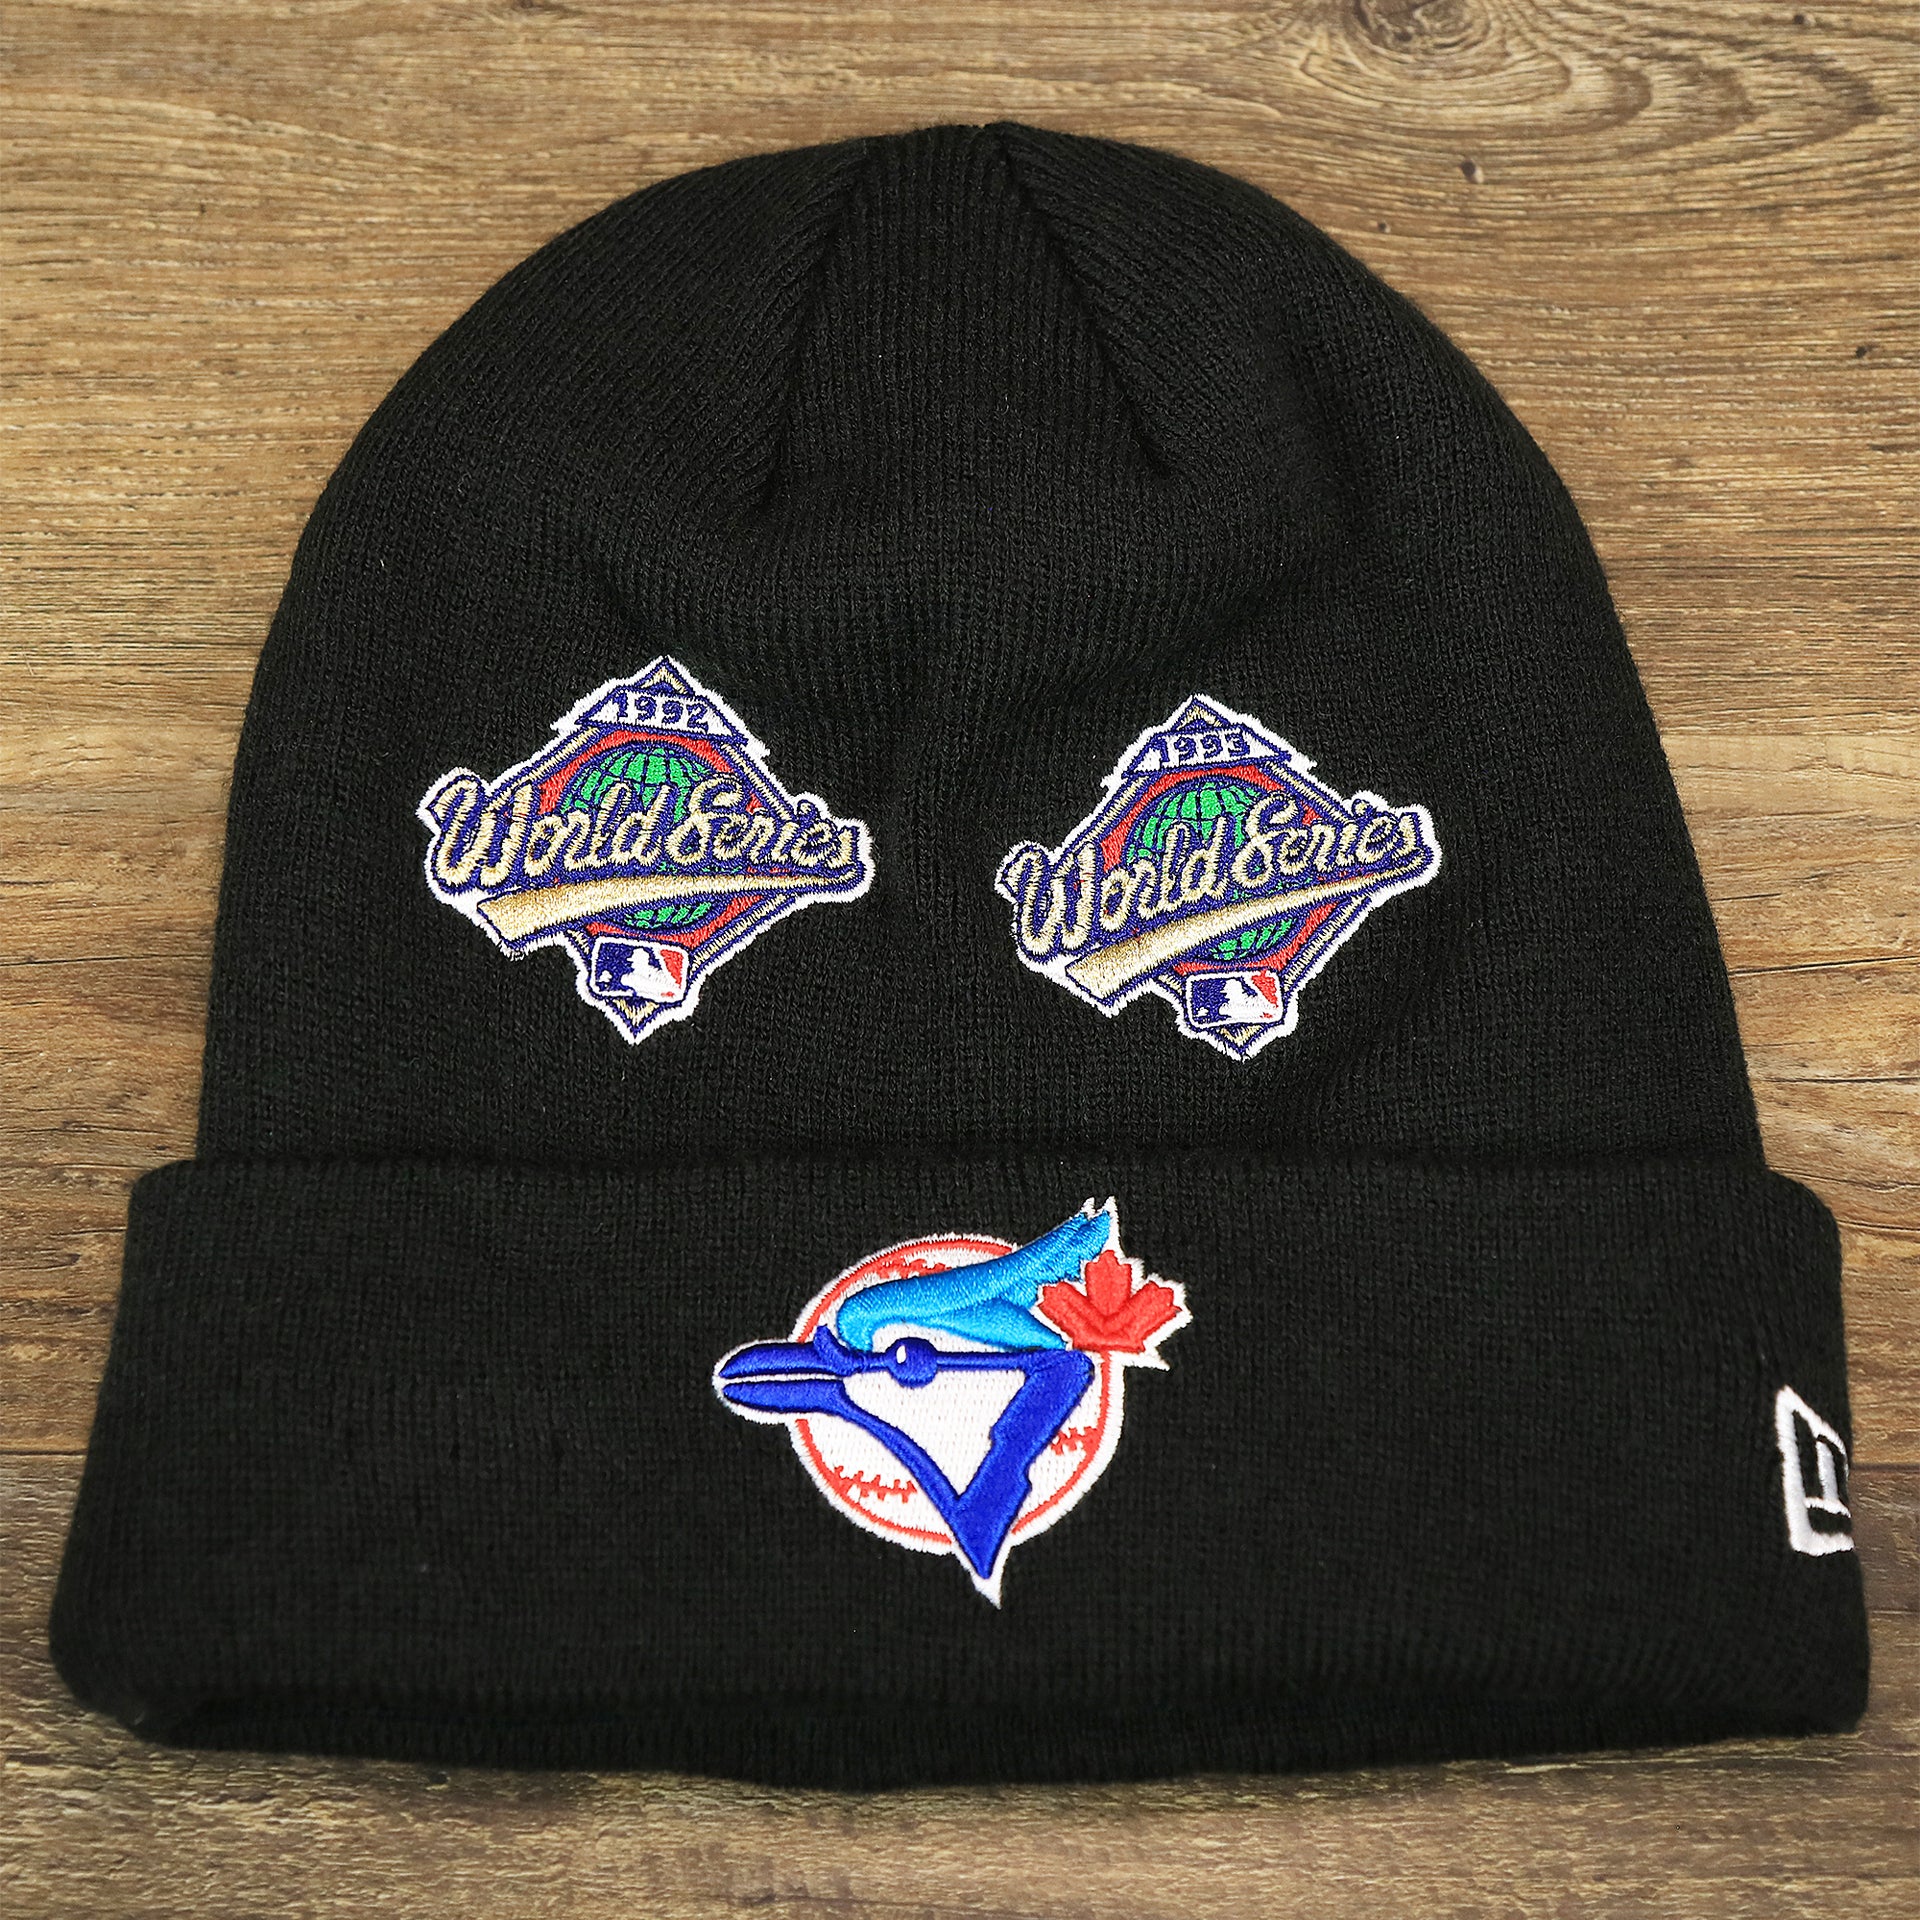 The front of the Toronto Blue Jays All Over World Series Side Patch 2x Champion Knit Cuff Beanie | New Era, Black